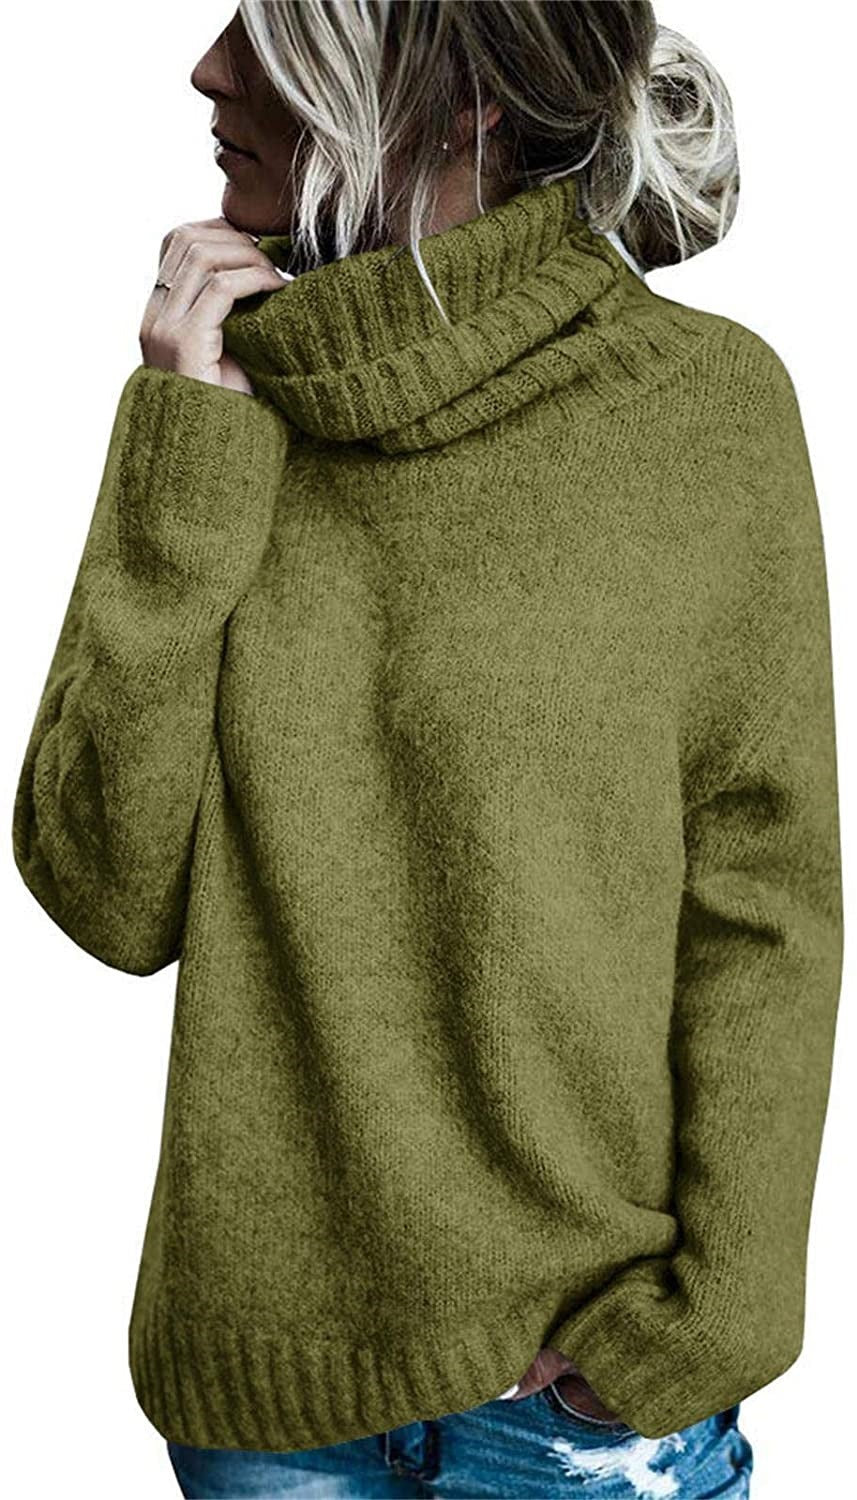 Women's Temperament Commute Fashion Turtleneck Long-sleeved Pullover Knitted Sweater